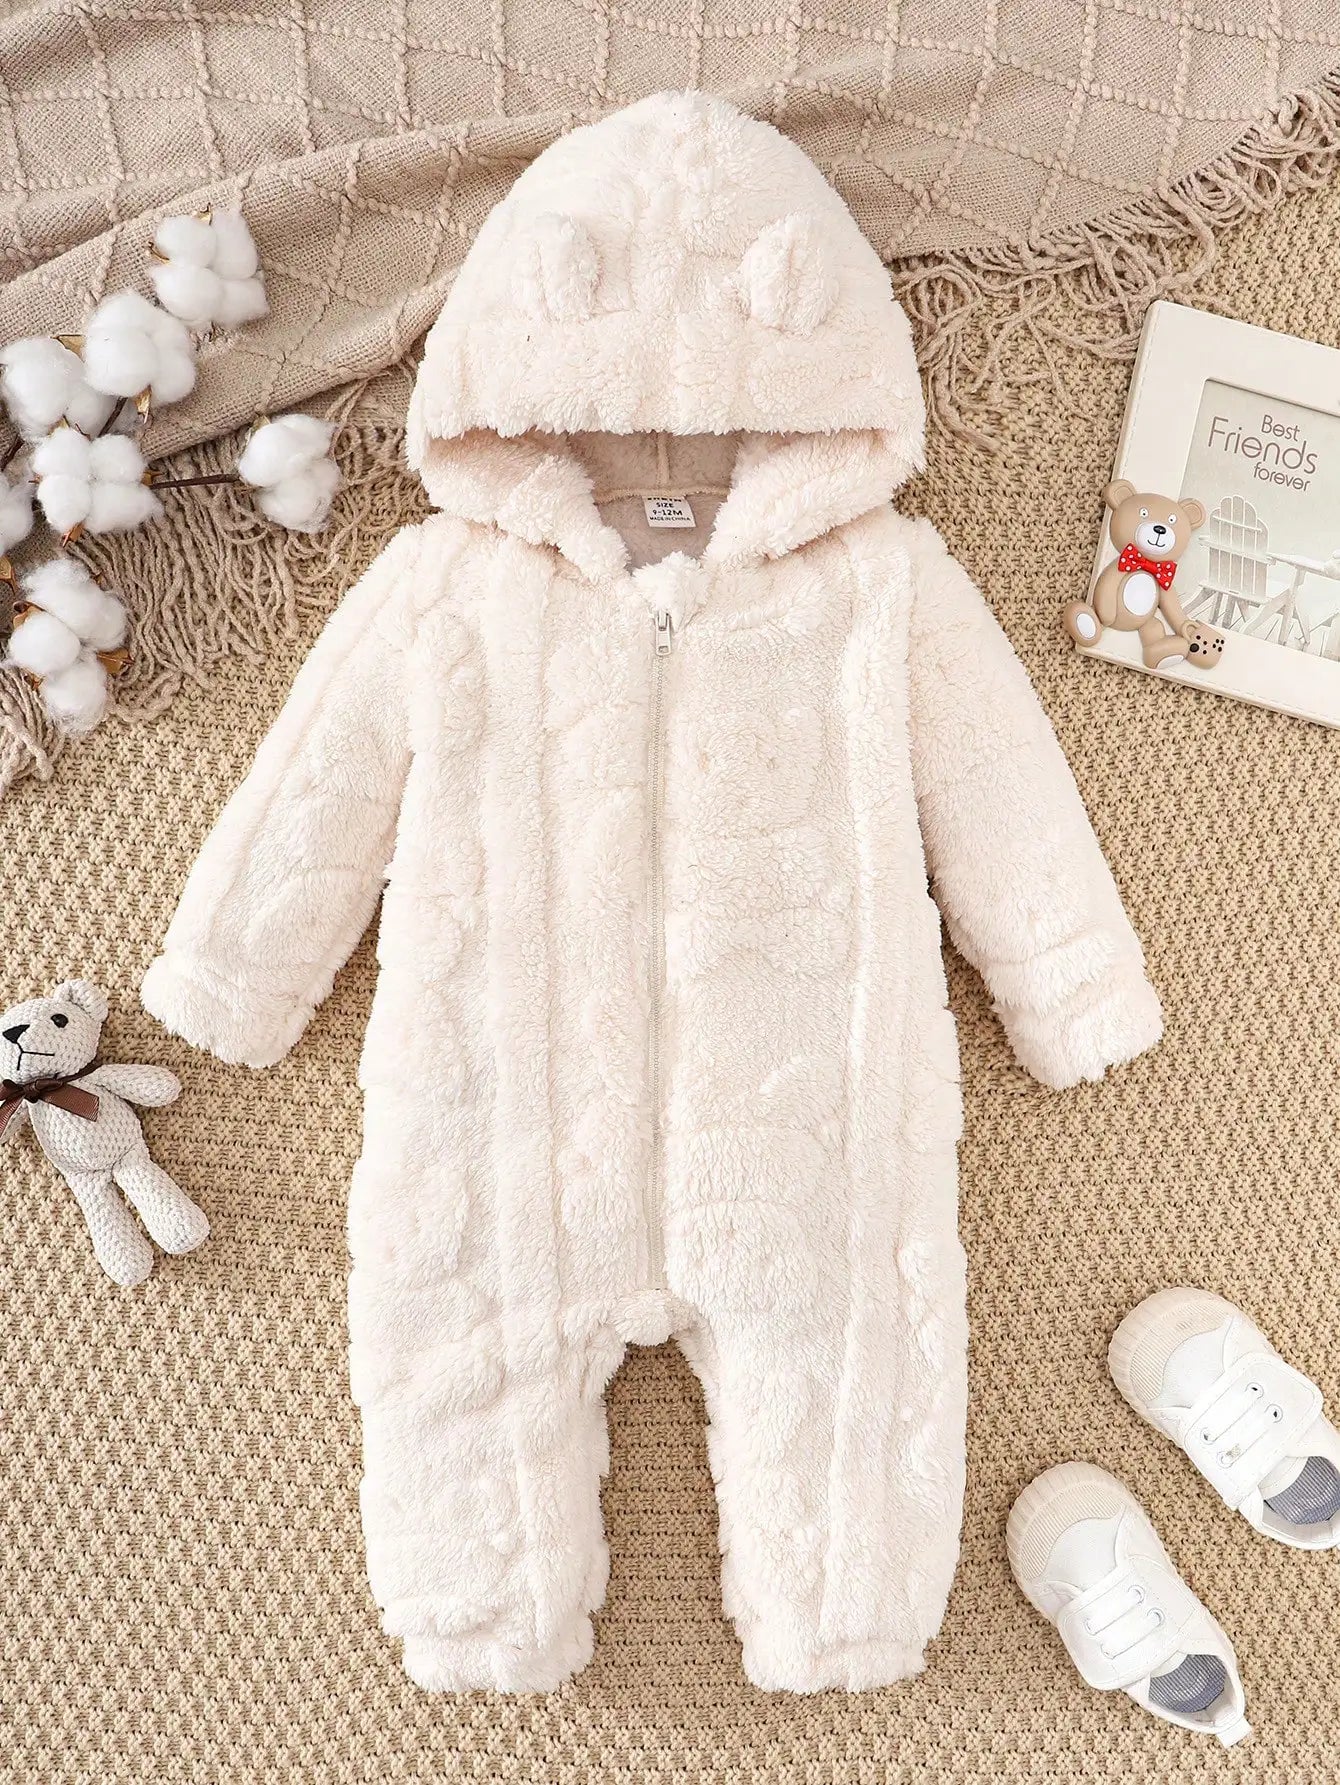 Baby Girl Baby Boy Baby Cute Soft Comfortable Fluffy Long Sleeve Hooded Romper Fall Winter